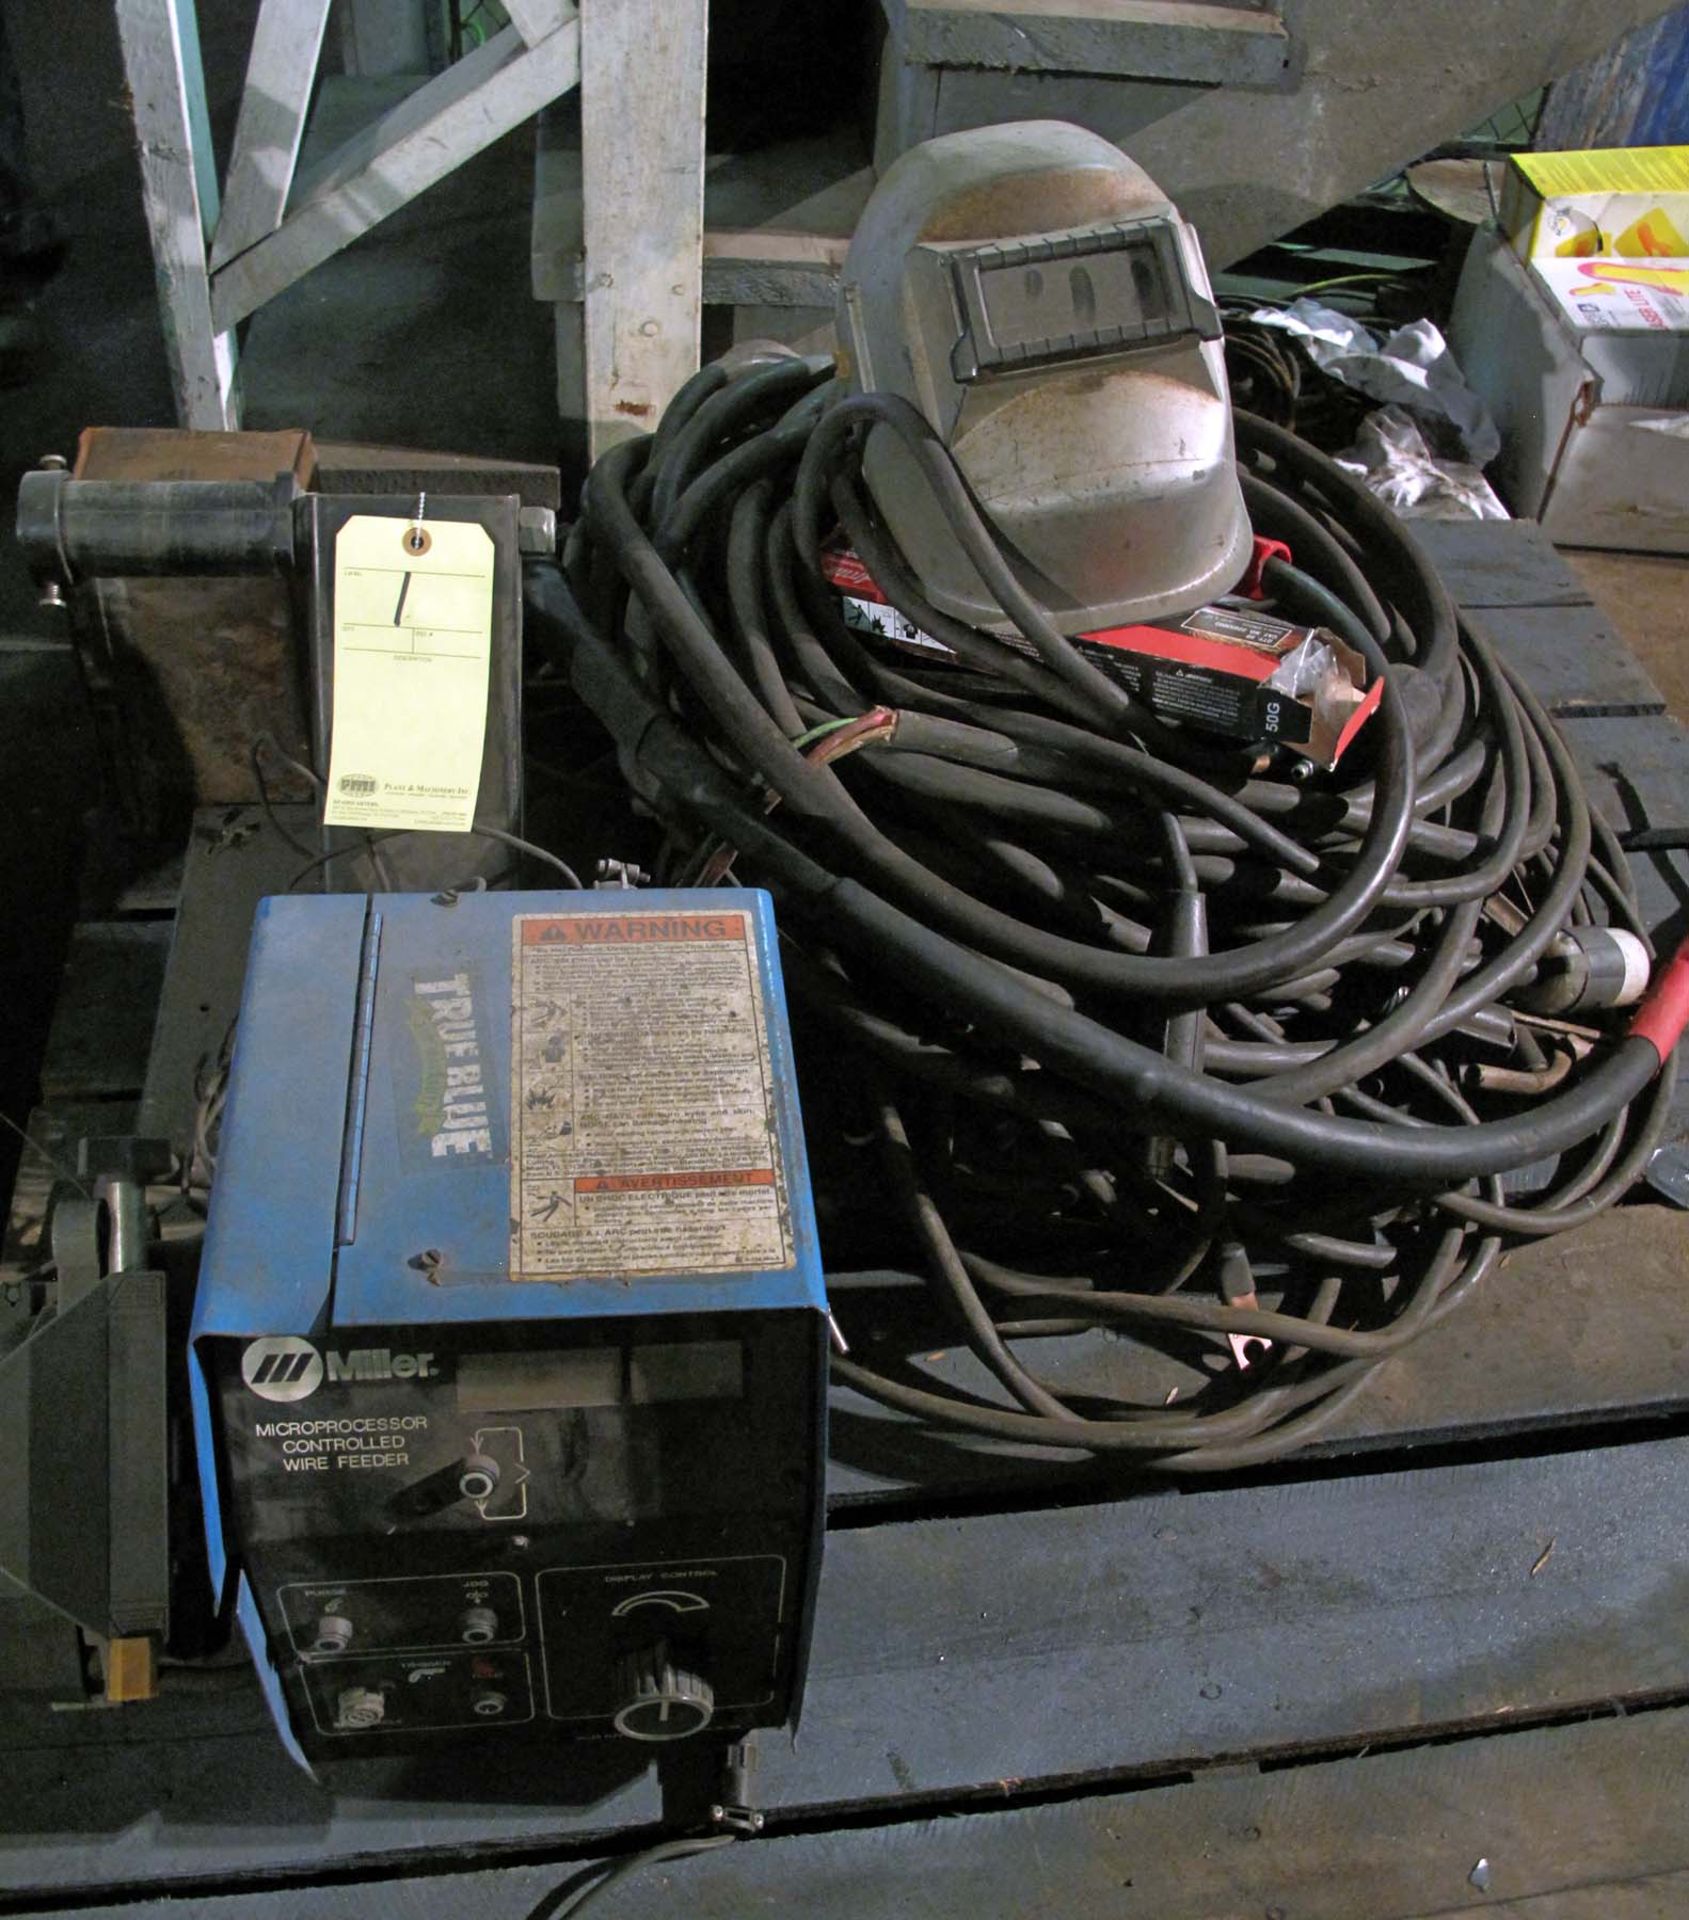 MICROPROCESSOR CONTROLLED WIRE FEEDER, MILLER 60M SERIES, w/extra welding leads